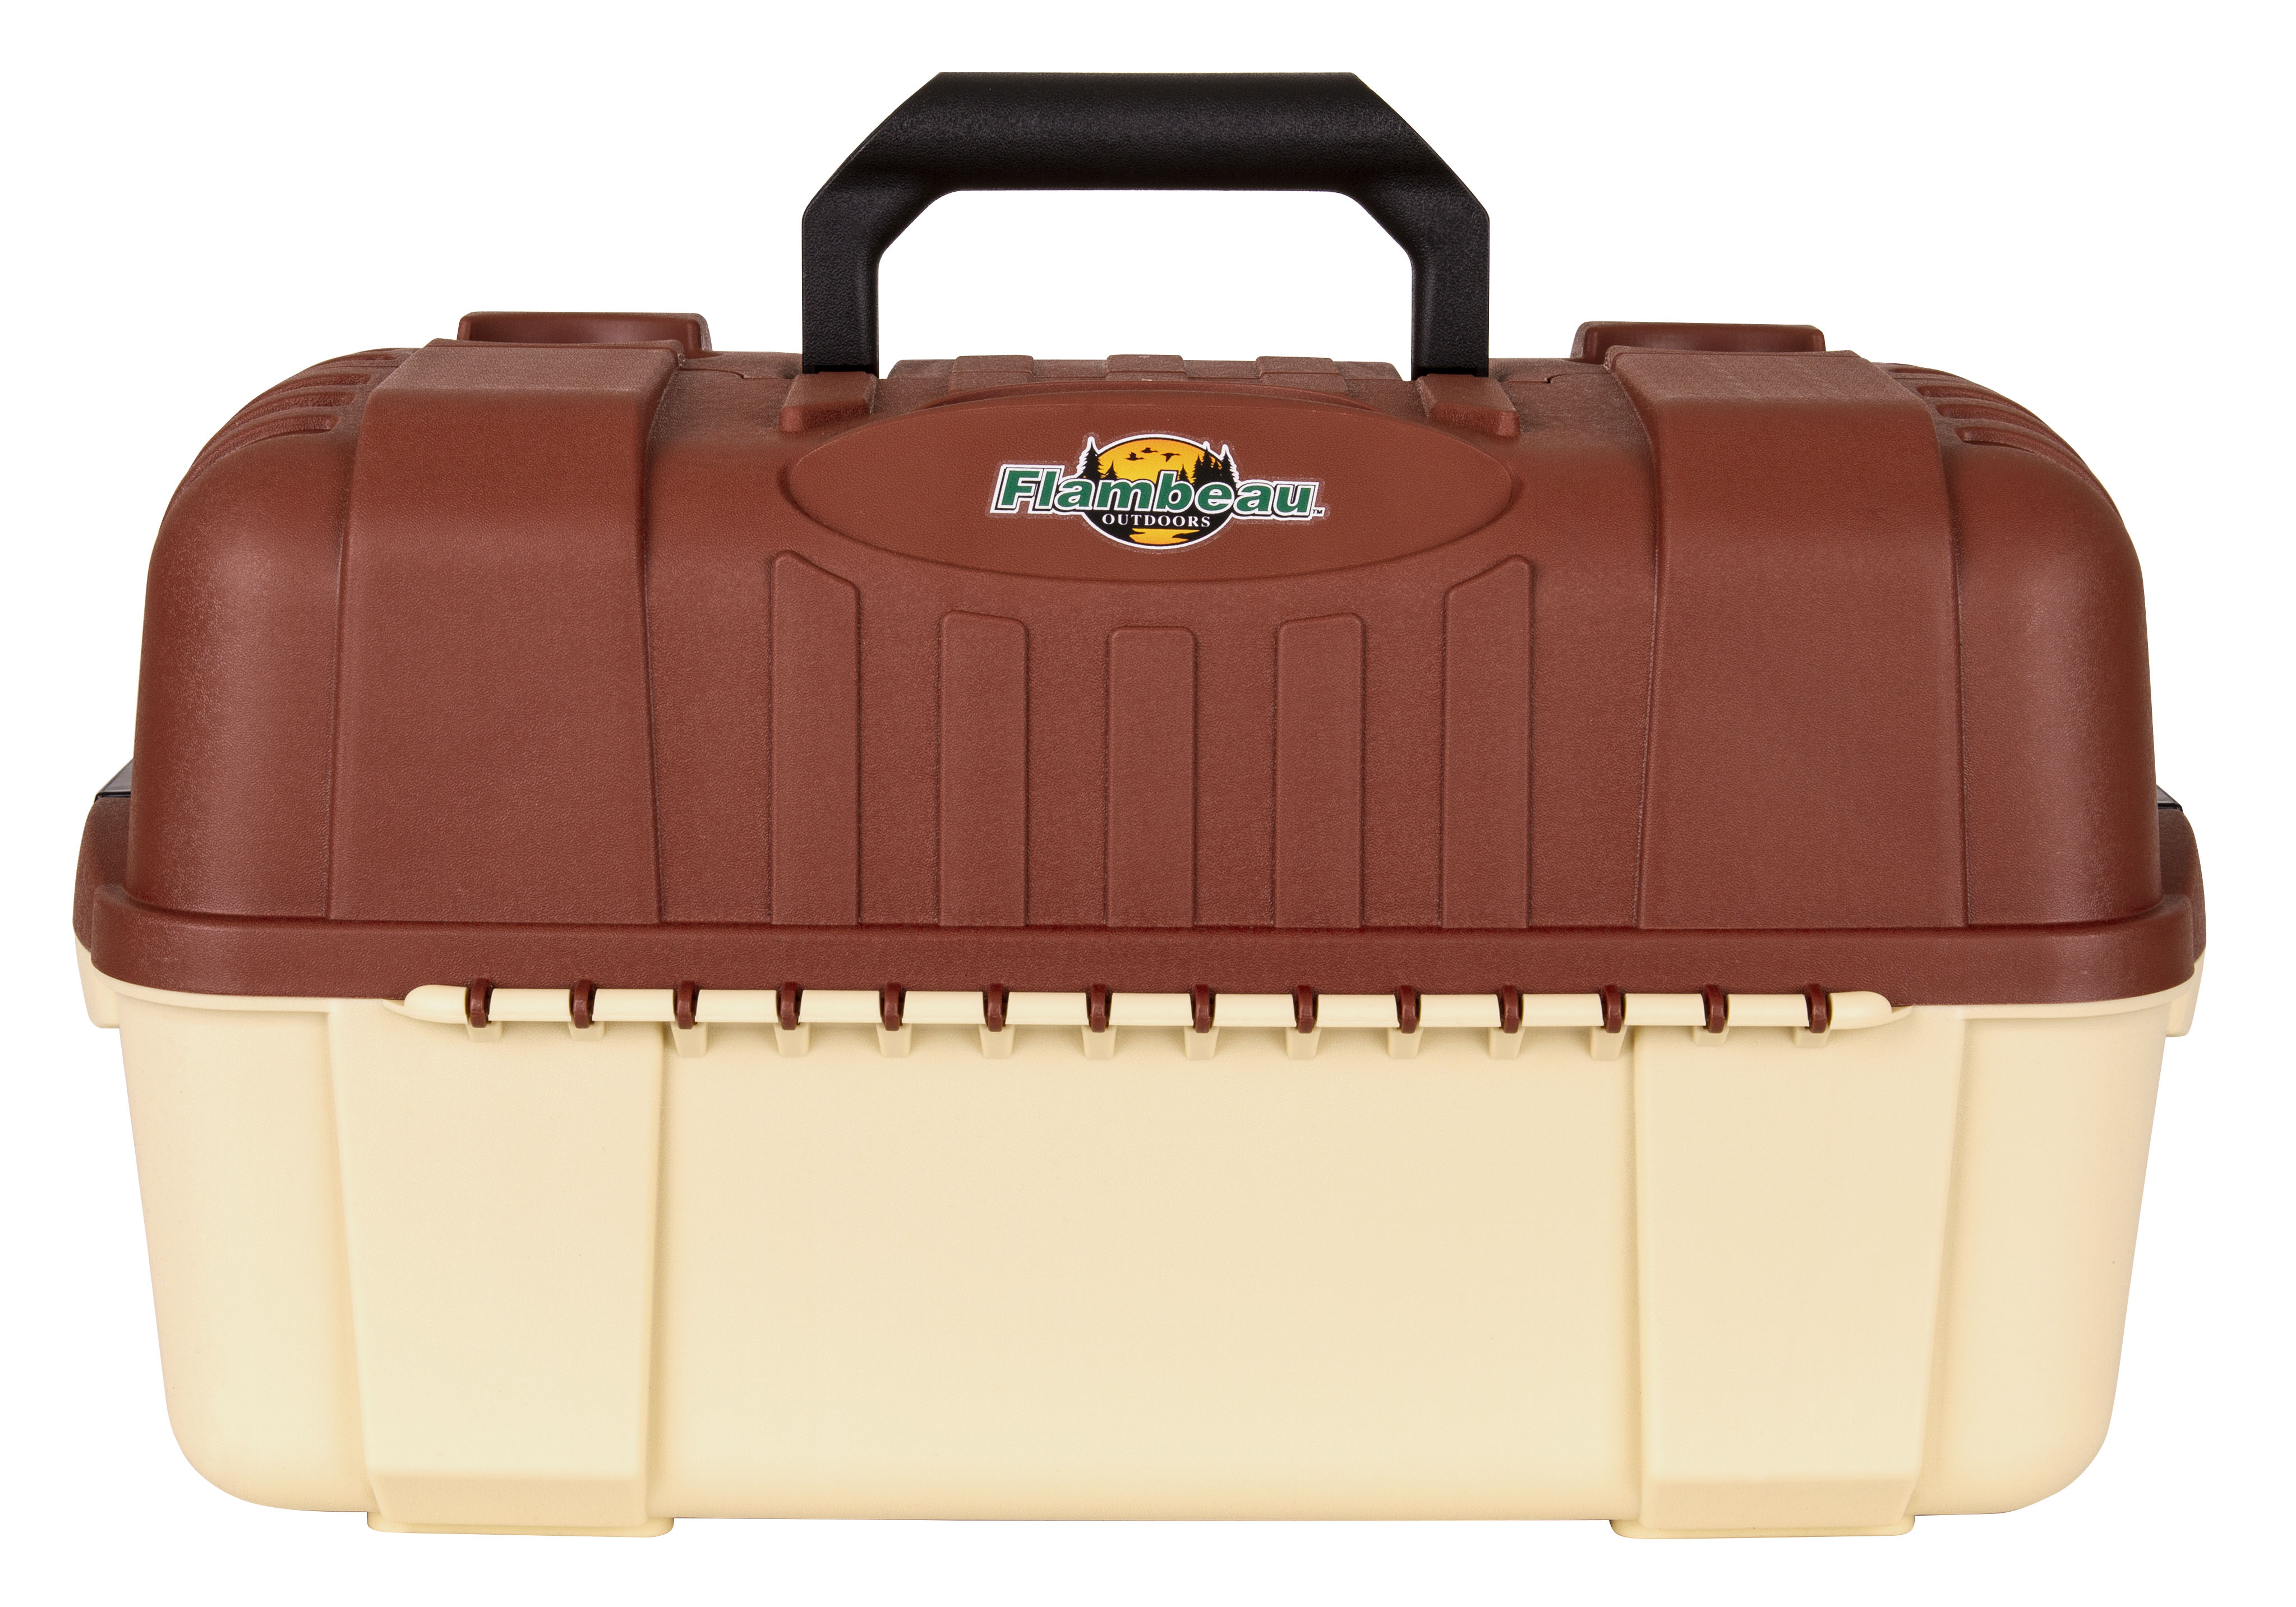 Flambeau Outdoors, 7 Tray Hip Roof Tackle Box, 20 inches long, Plastic, Beige - image 2 of 6